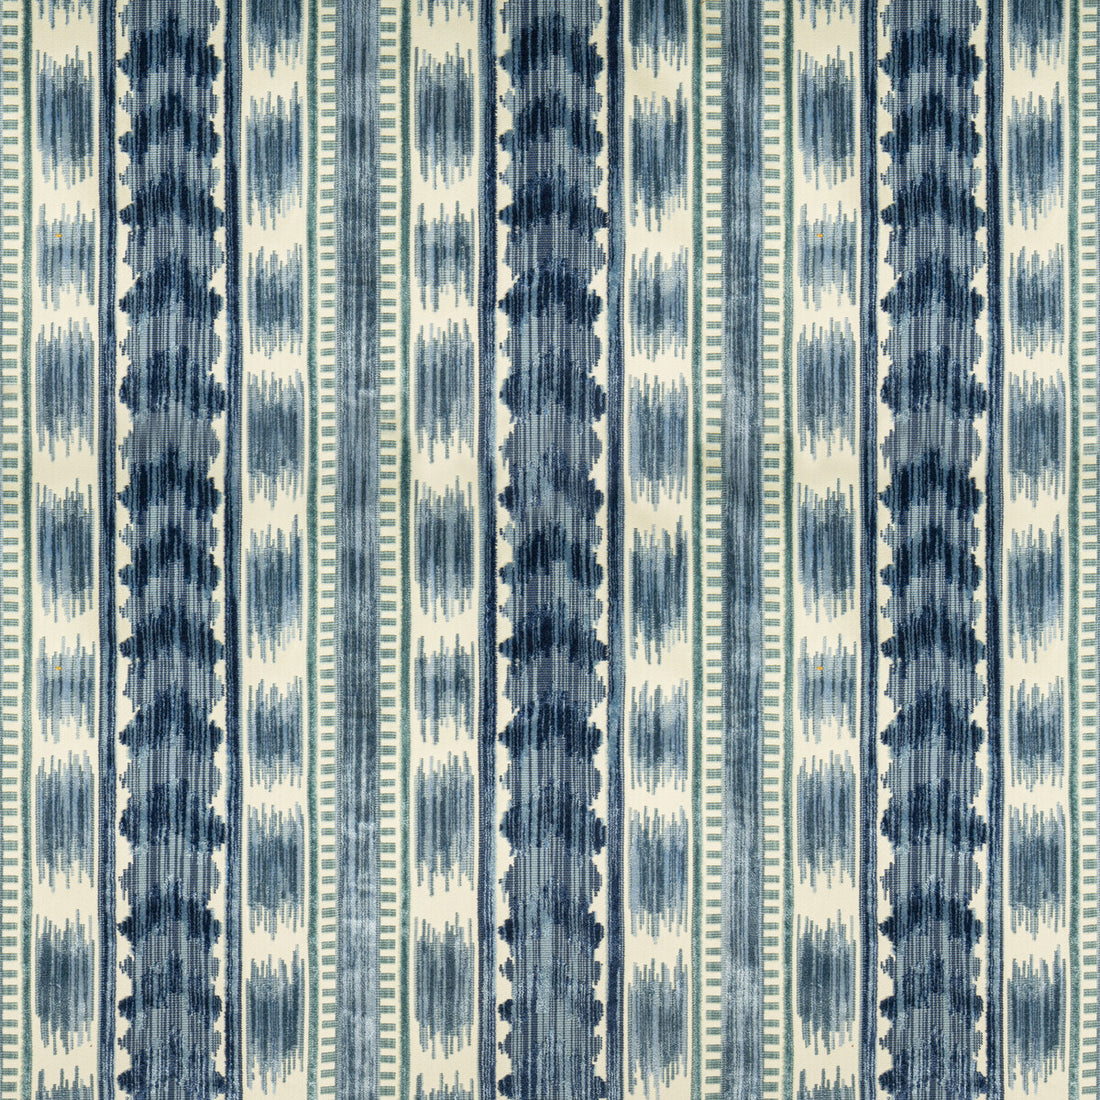 Bayeaux Velvet fabric in blue color - pattern 8020117.515.0 - by Brunschwig &amp; Fils in the Chaumont Velvets collection